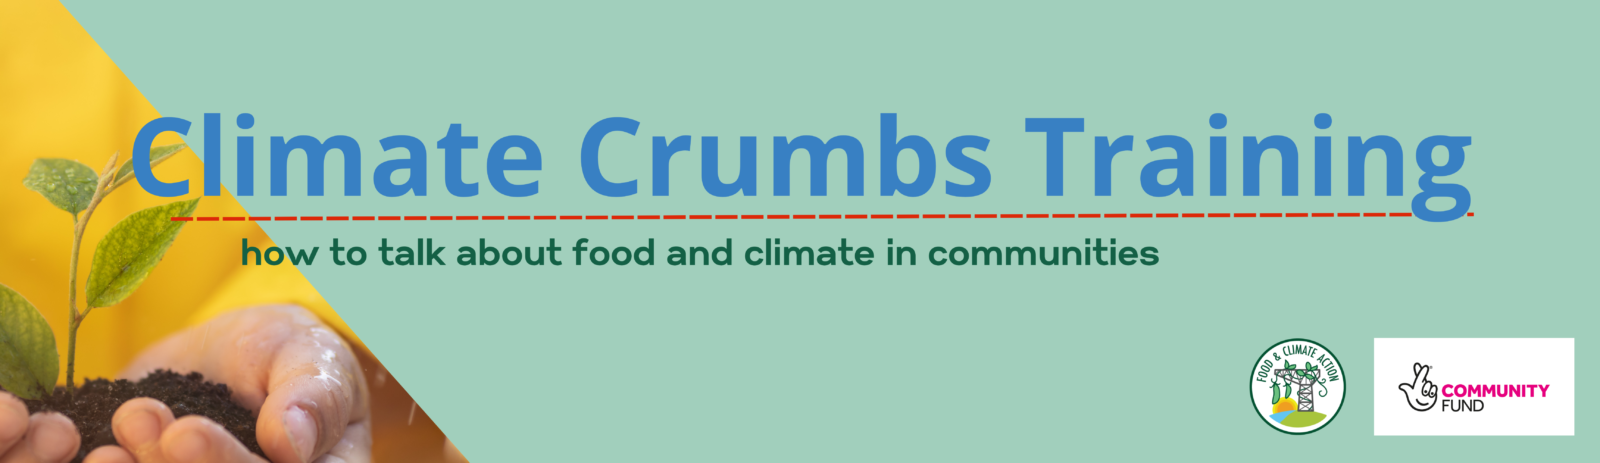 Climate Crumbs Email Banner